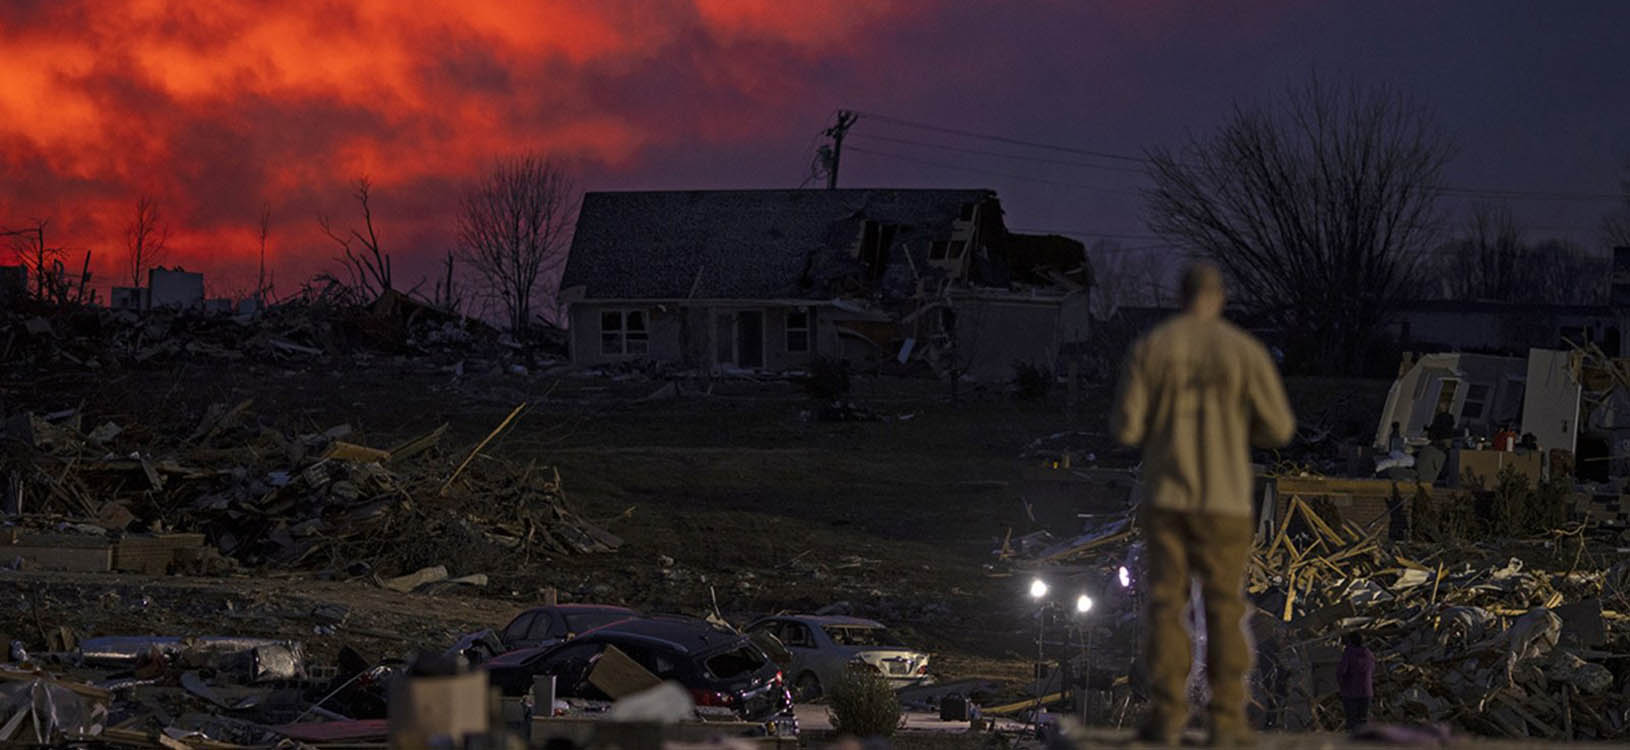 How can night vision save your life during a natural disaster?